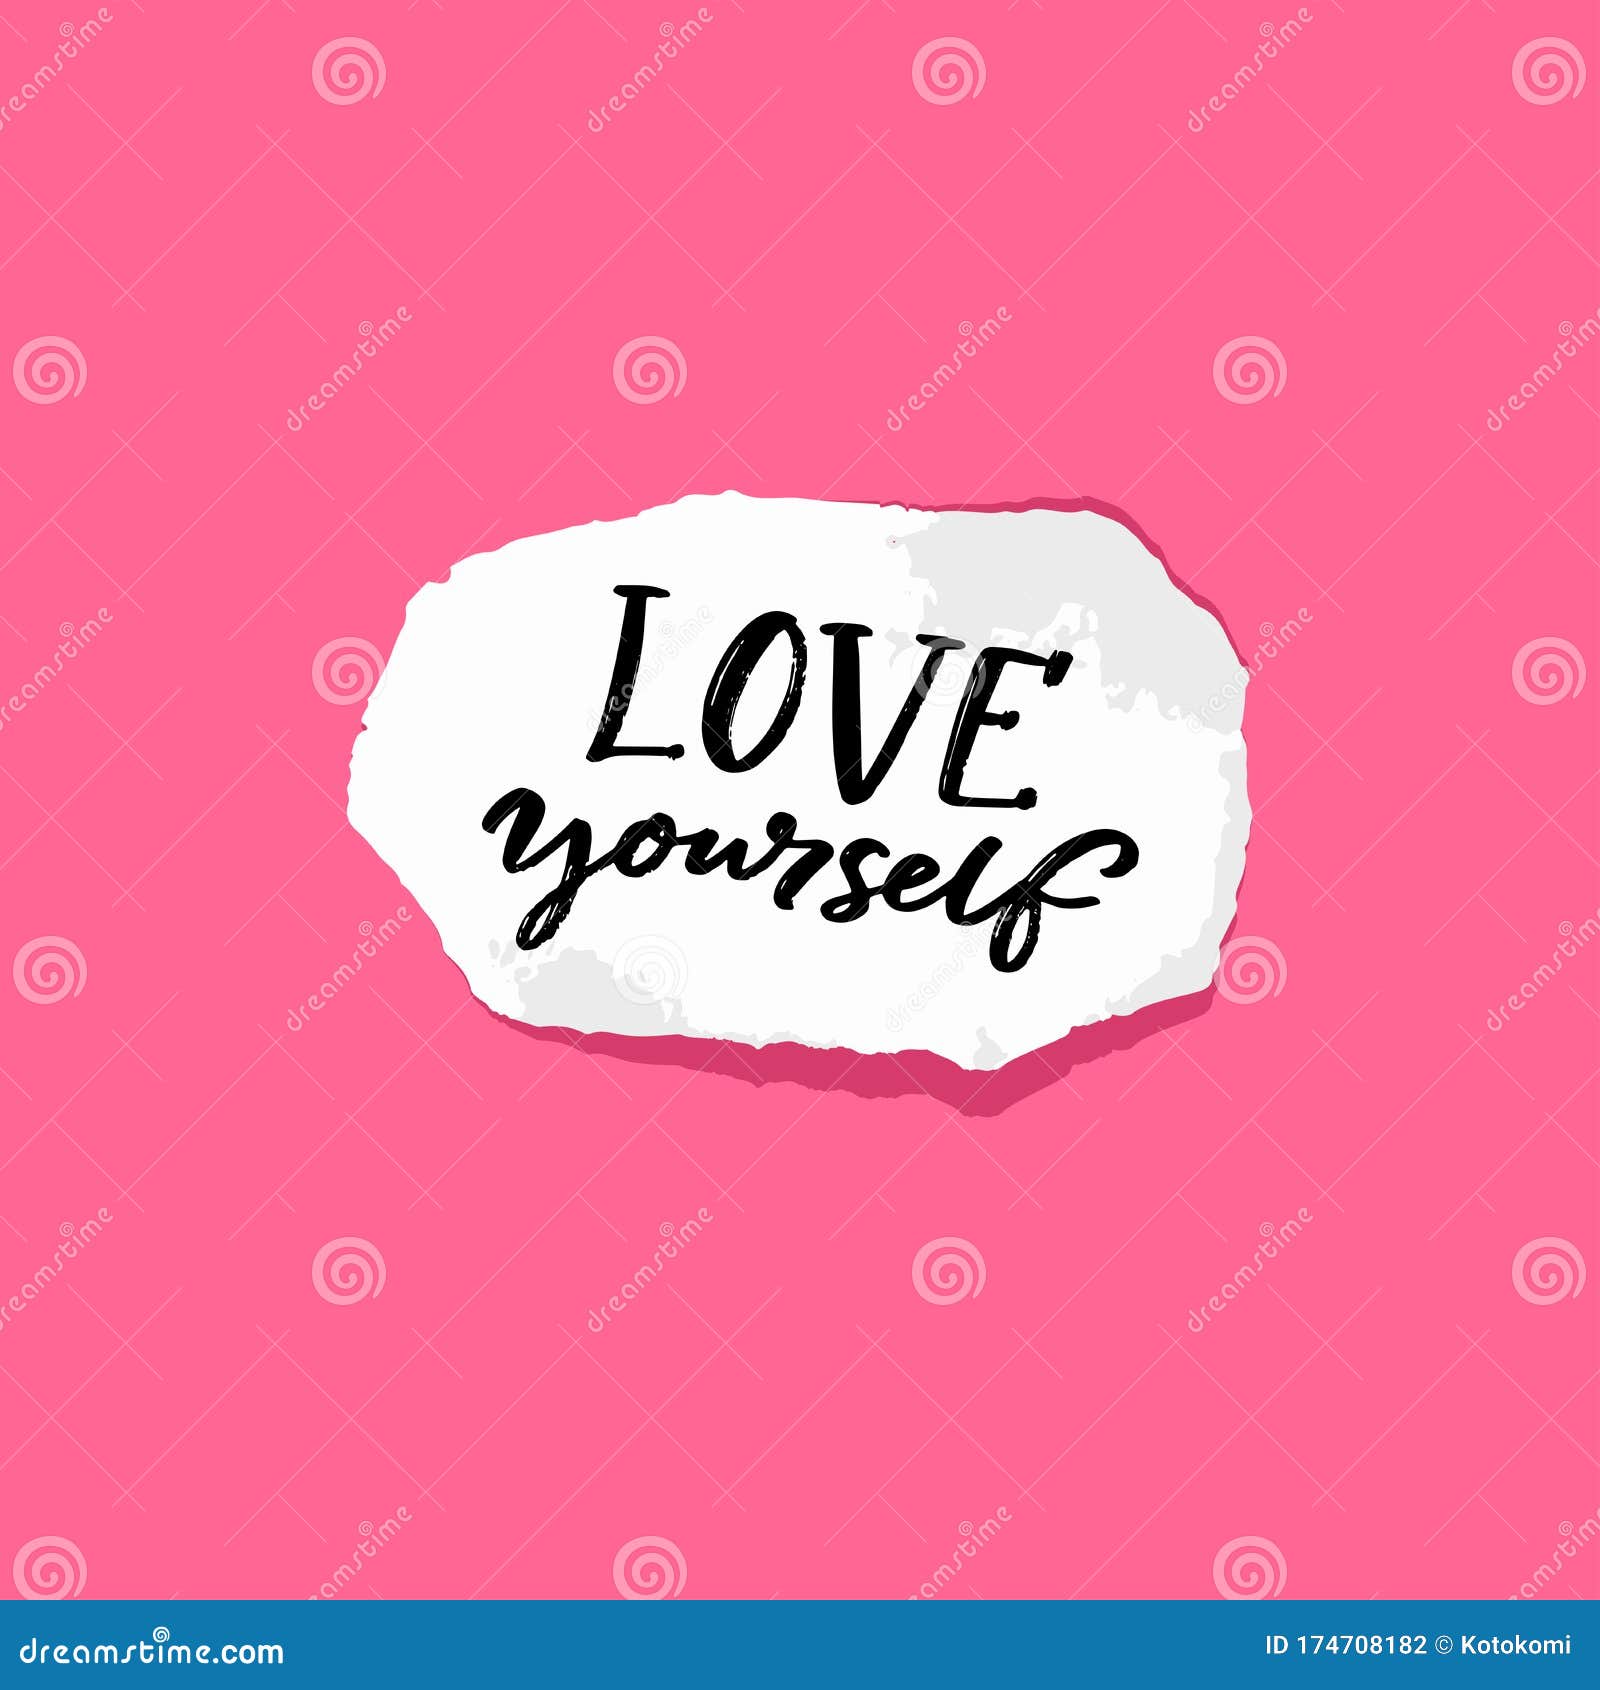 love yourself. positive quote about self acceptance. handwritten note on torn piece of paper, pink background